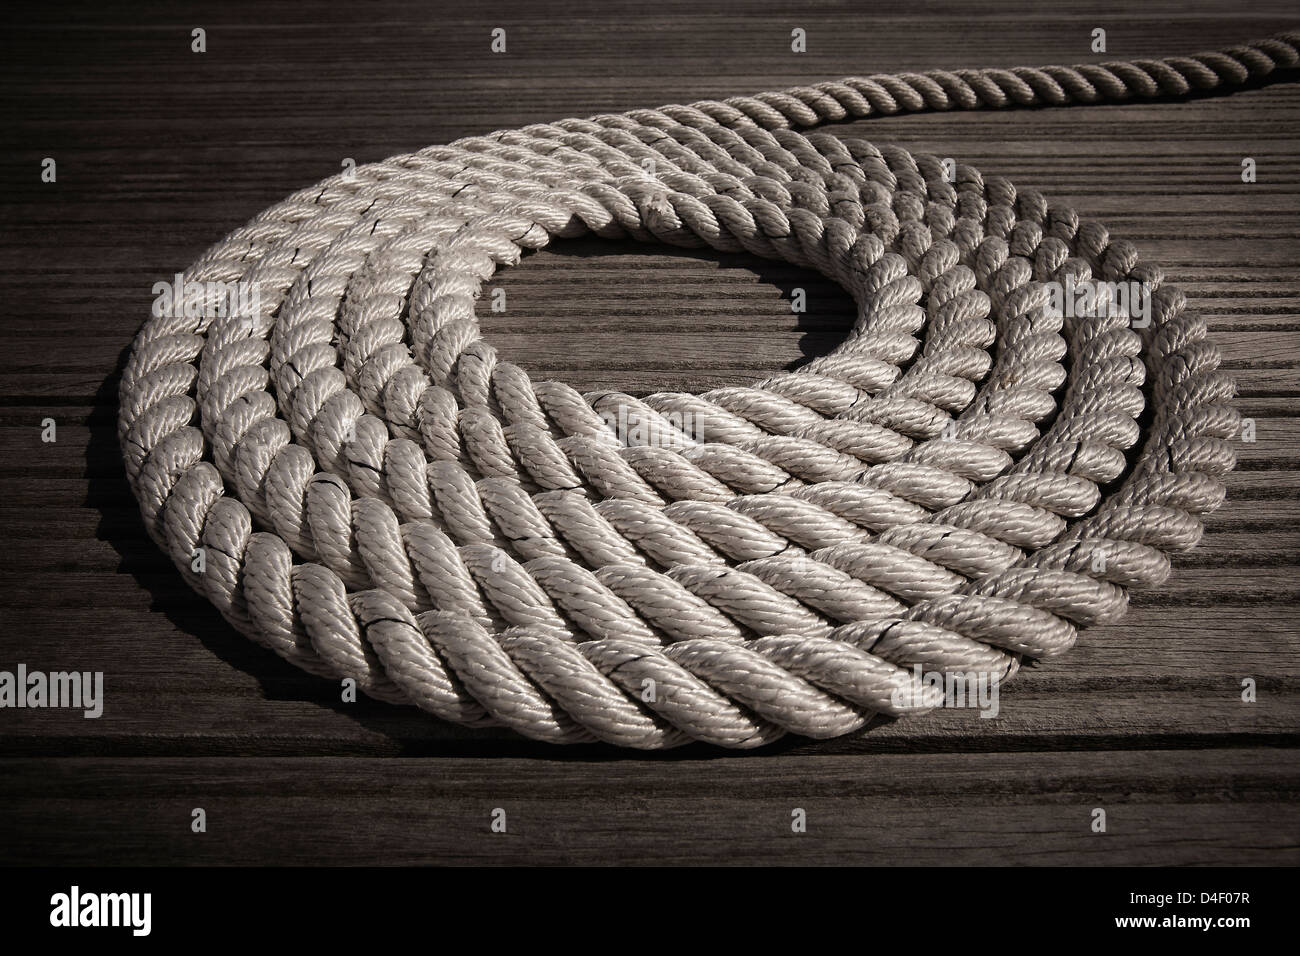 Rope coiled in circle on boardwalk Stock Photo